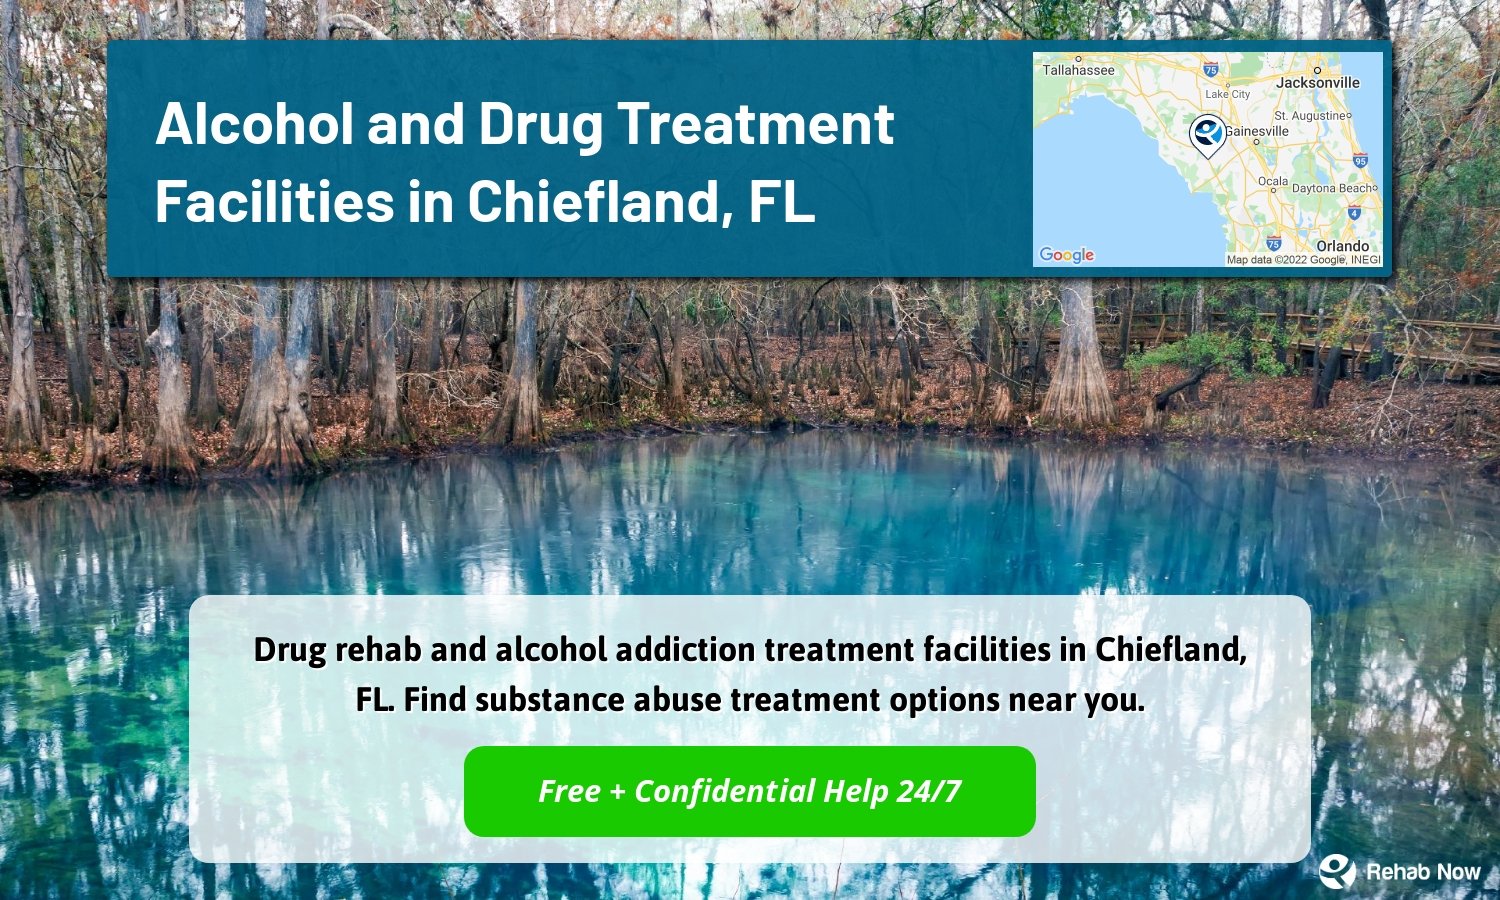 Drug rehab and alcohol addiction treatment facilities in Chiefland, FL. Find substance abuse treatment options near you.